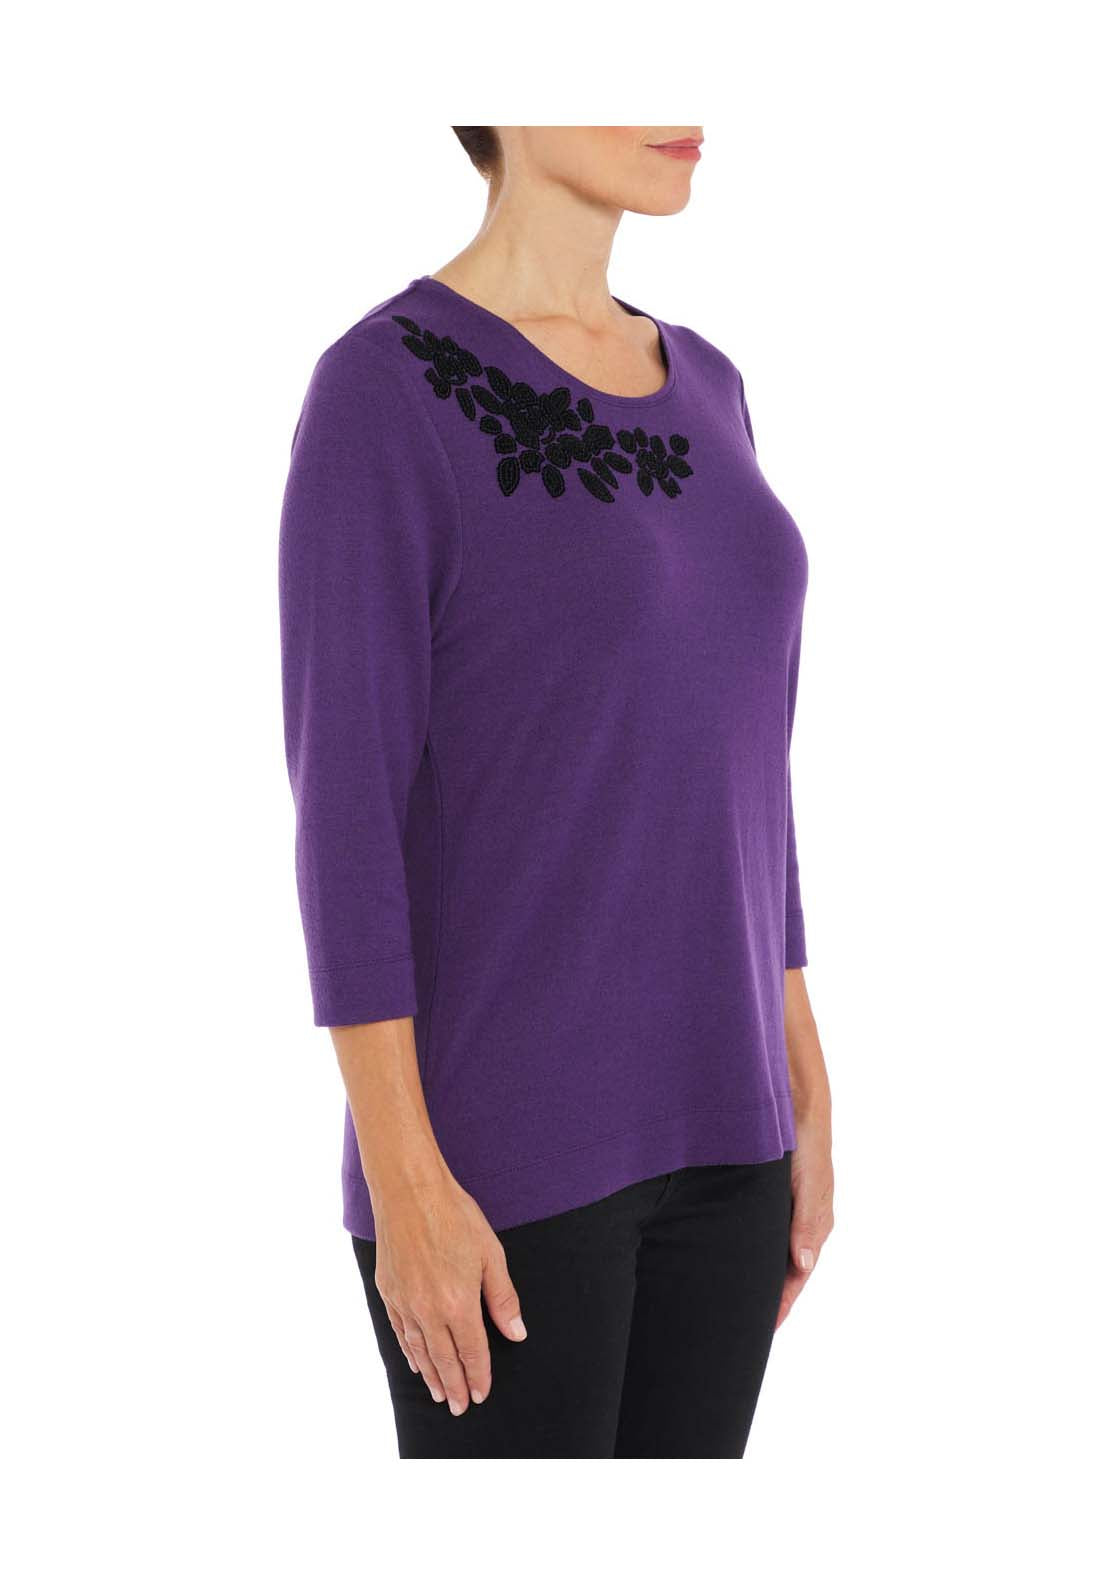 Tigiwear Embellished Lilac Cowl Neck Top 2 Shaws Department Stores